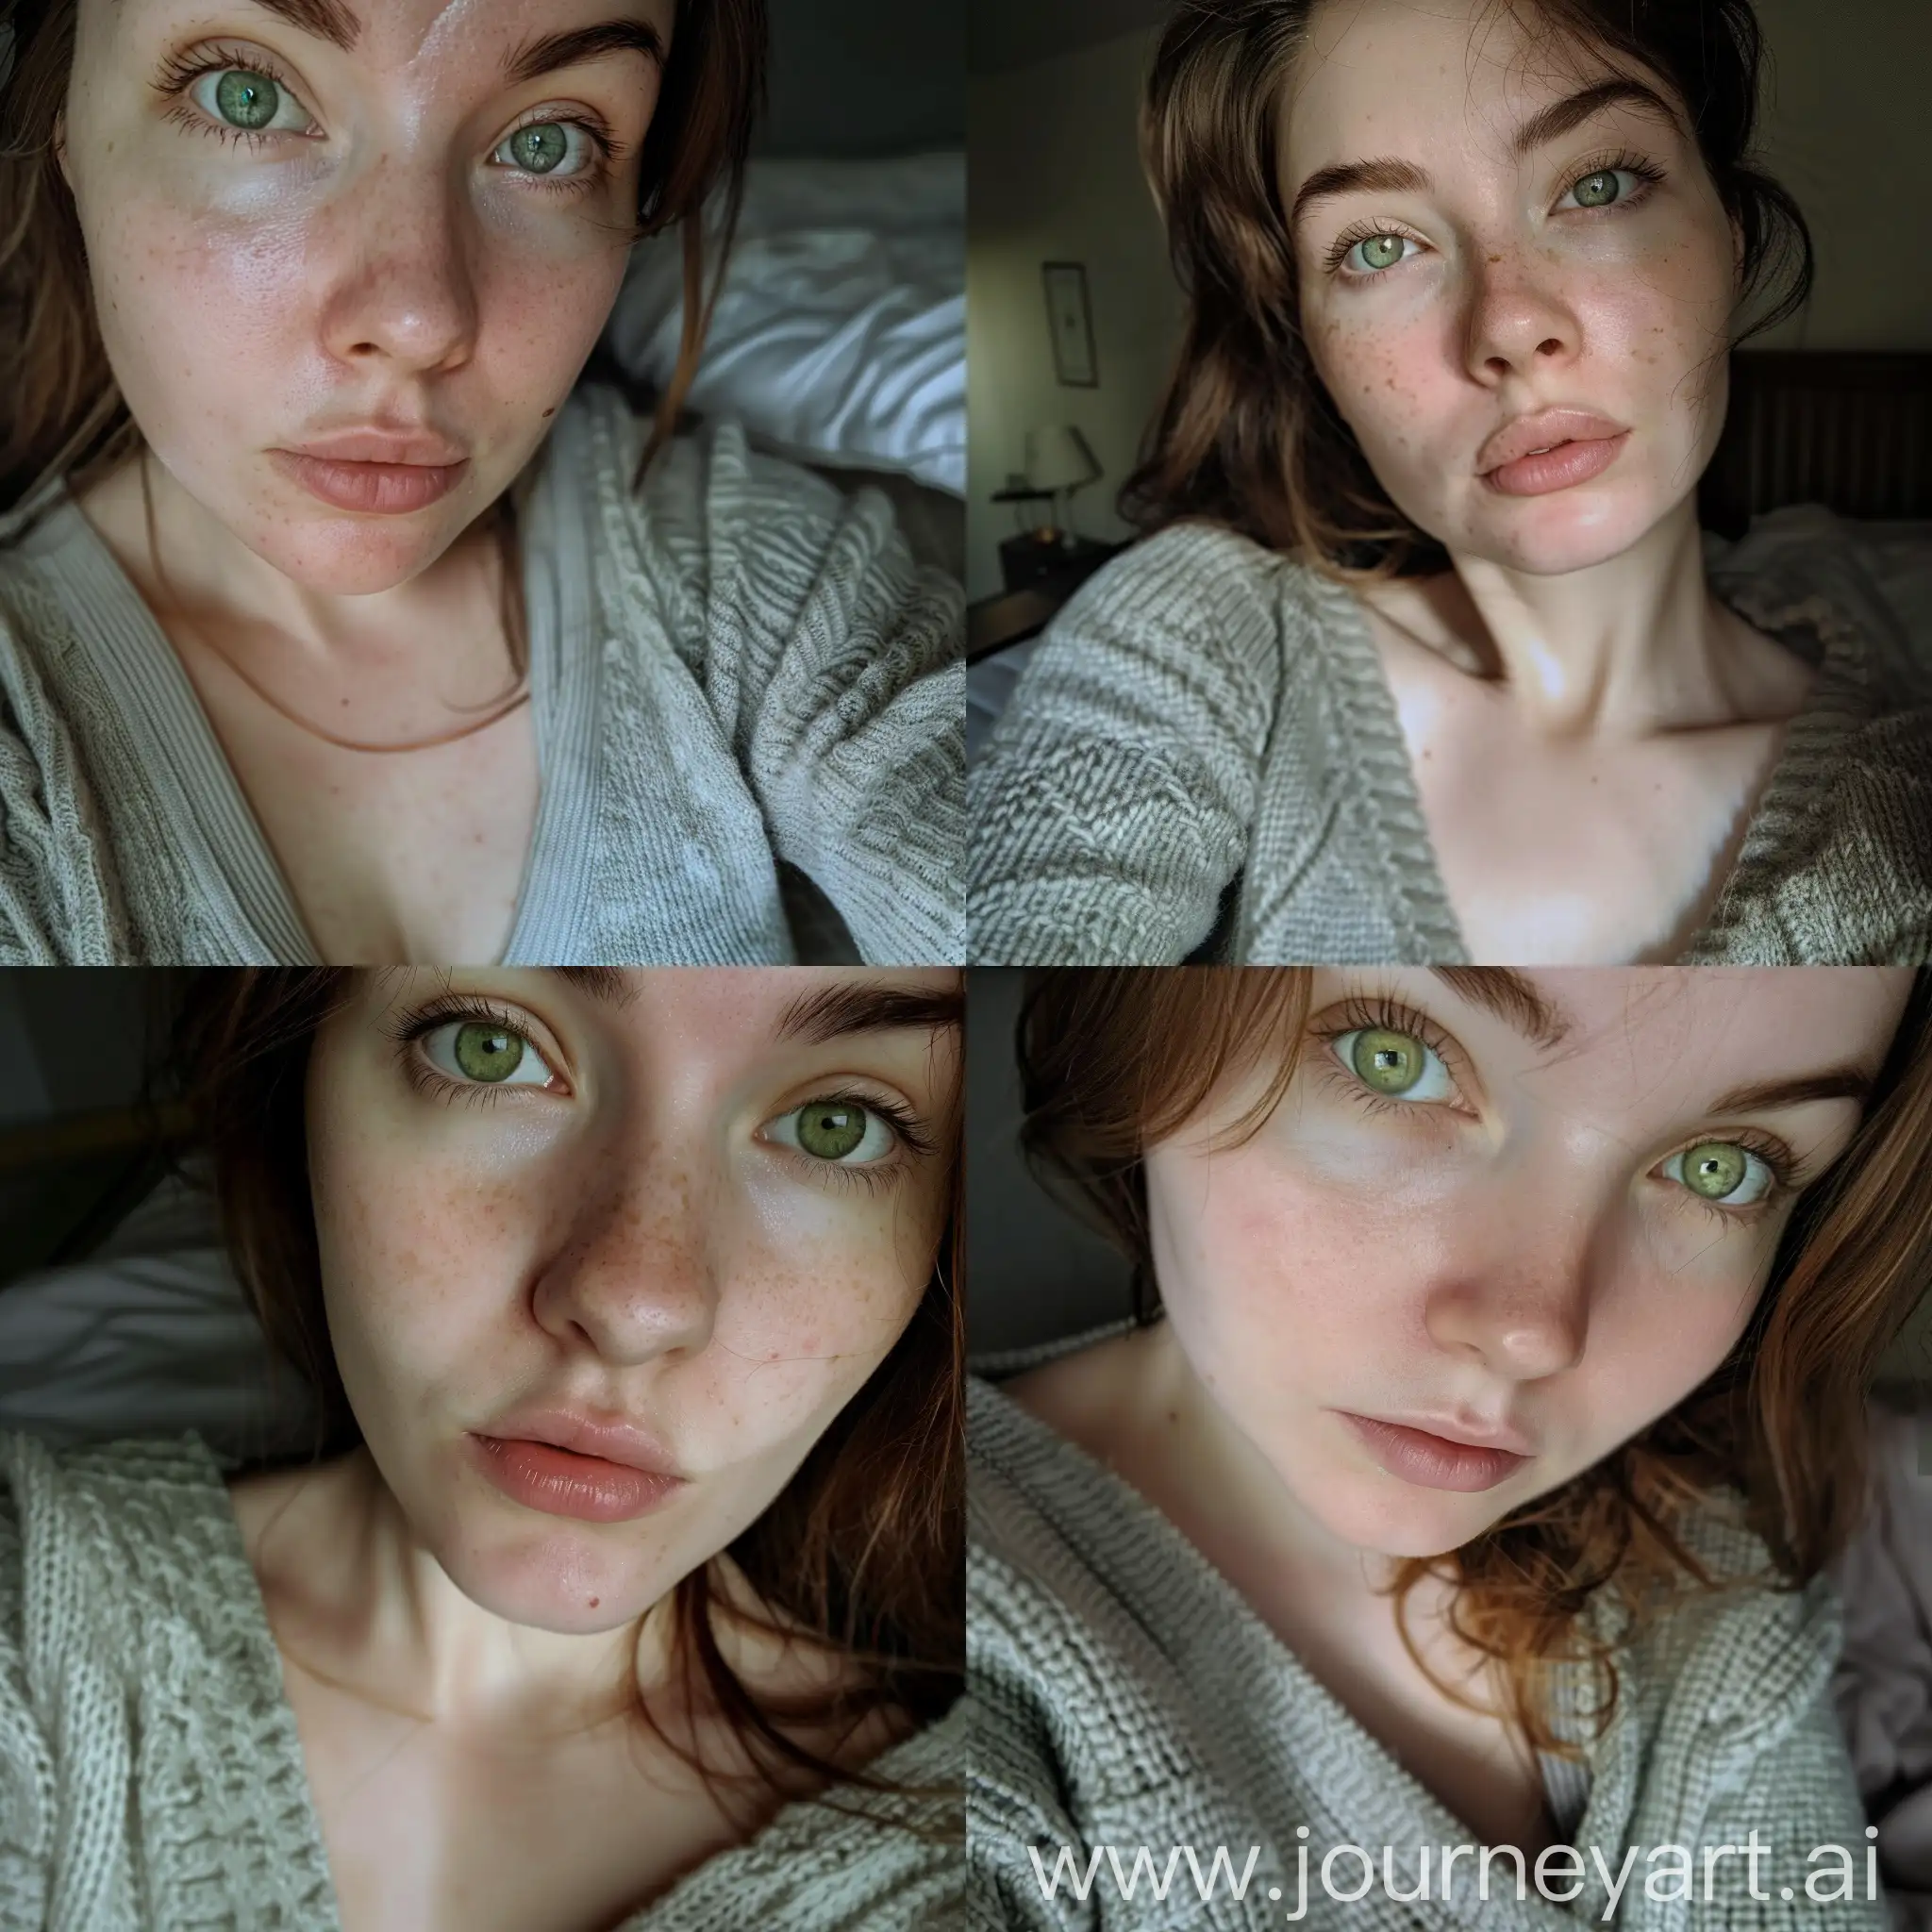 LowQuality-Selfie-Portrait-of-a-Woman-with-Captivating-Green-Eyes